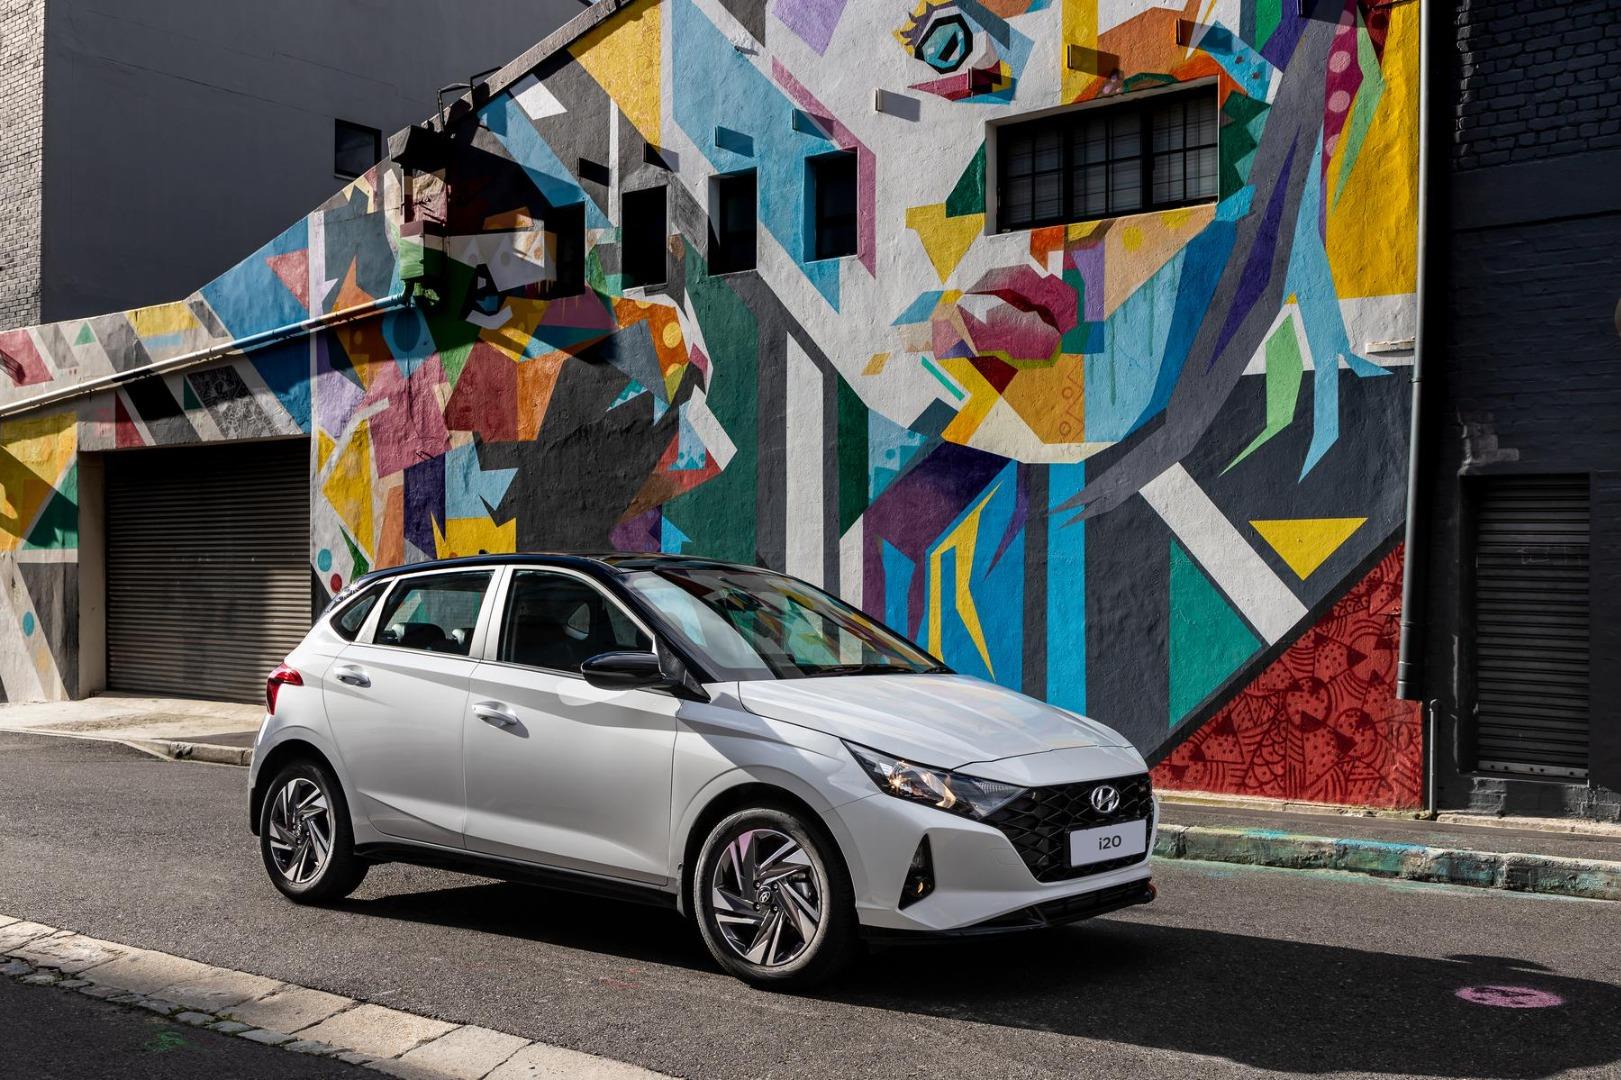 how much are car repayments on a new hyundai i20?